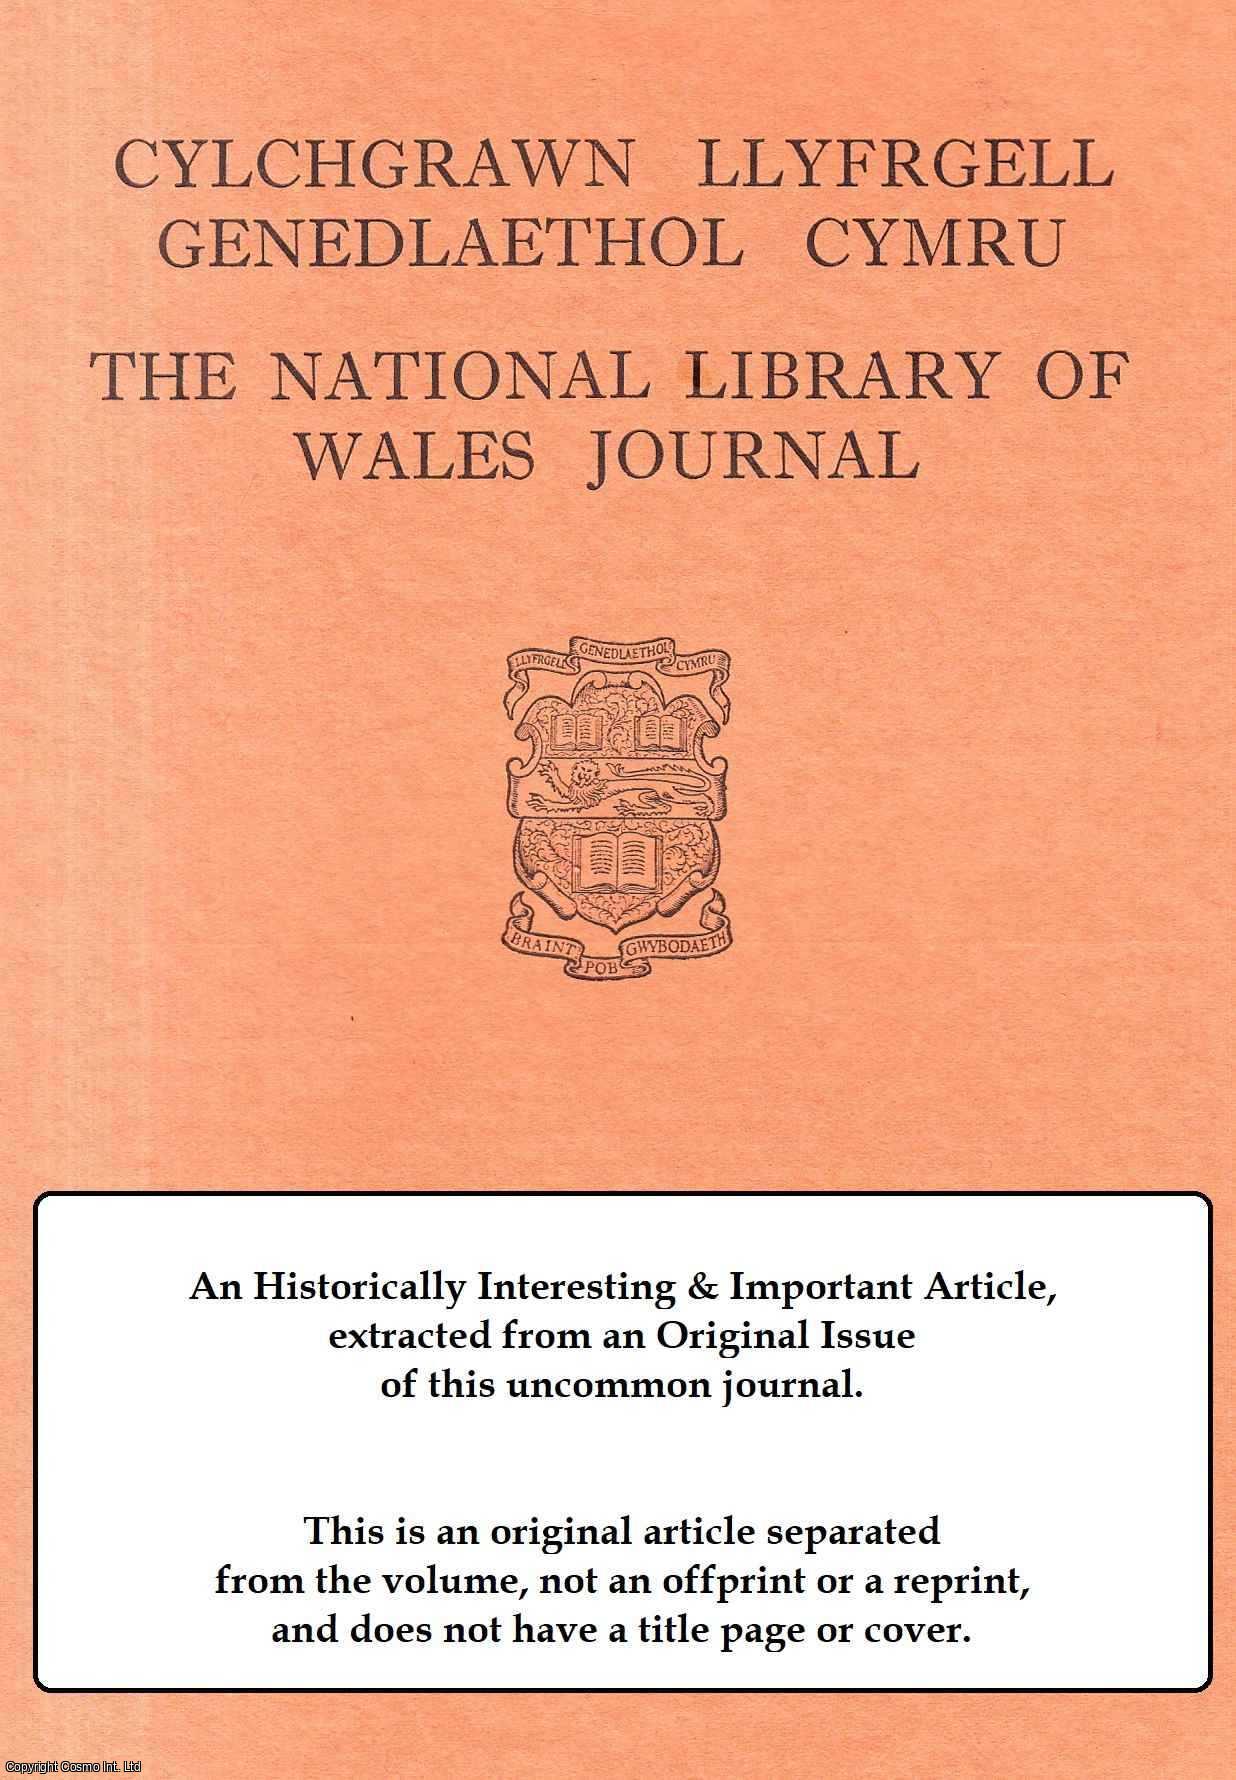 --- - Pedwar Iarddur. An original article from The National Library of Wales Journal, 1978.